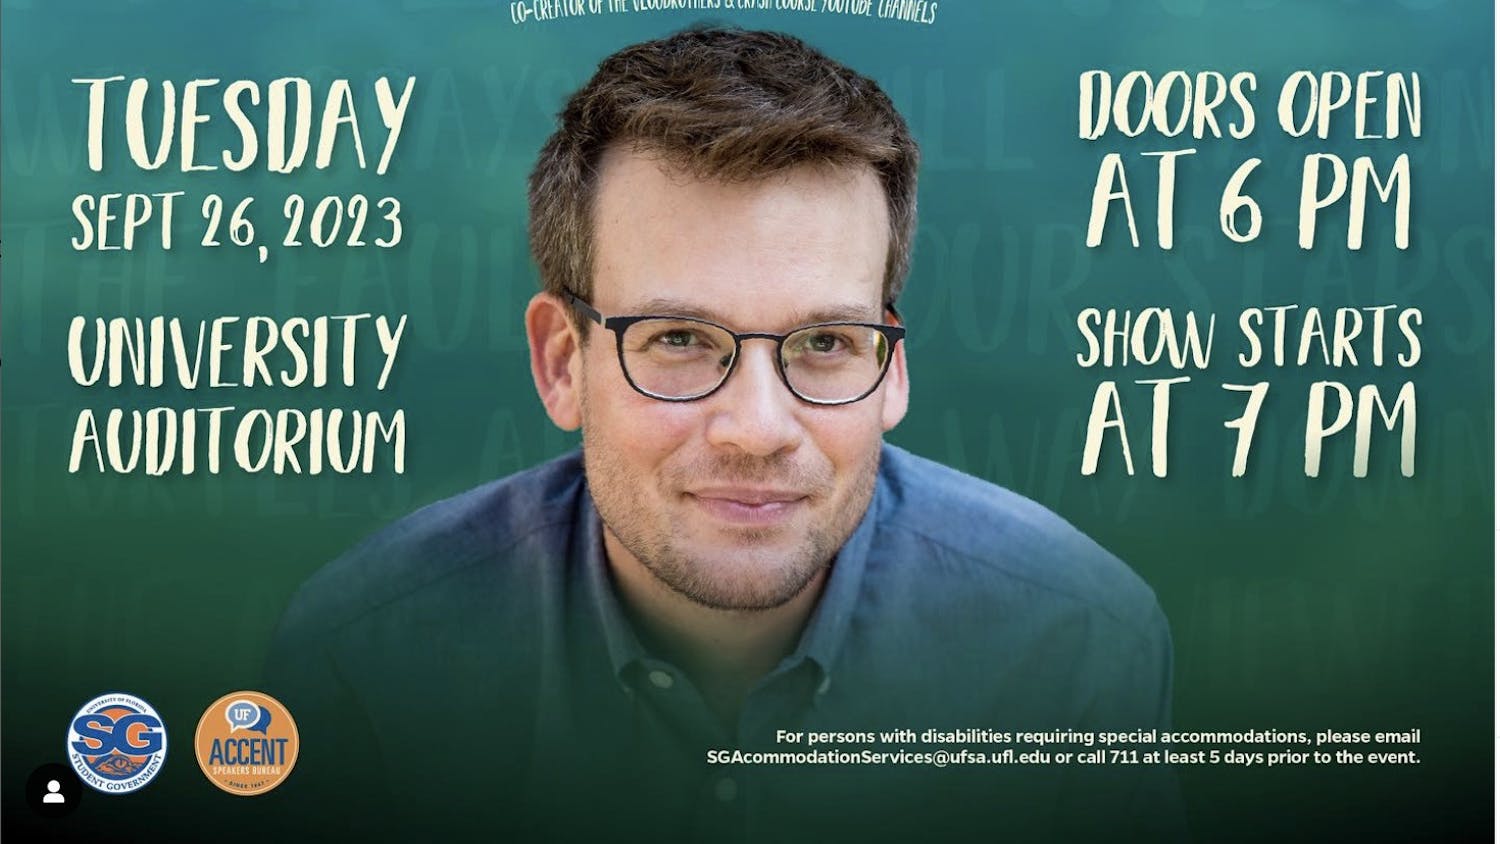 The poster from ACCENT Speakers Bureau's announcement that John Green will speak at UF Sept. 26.